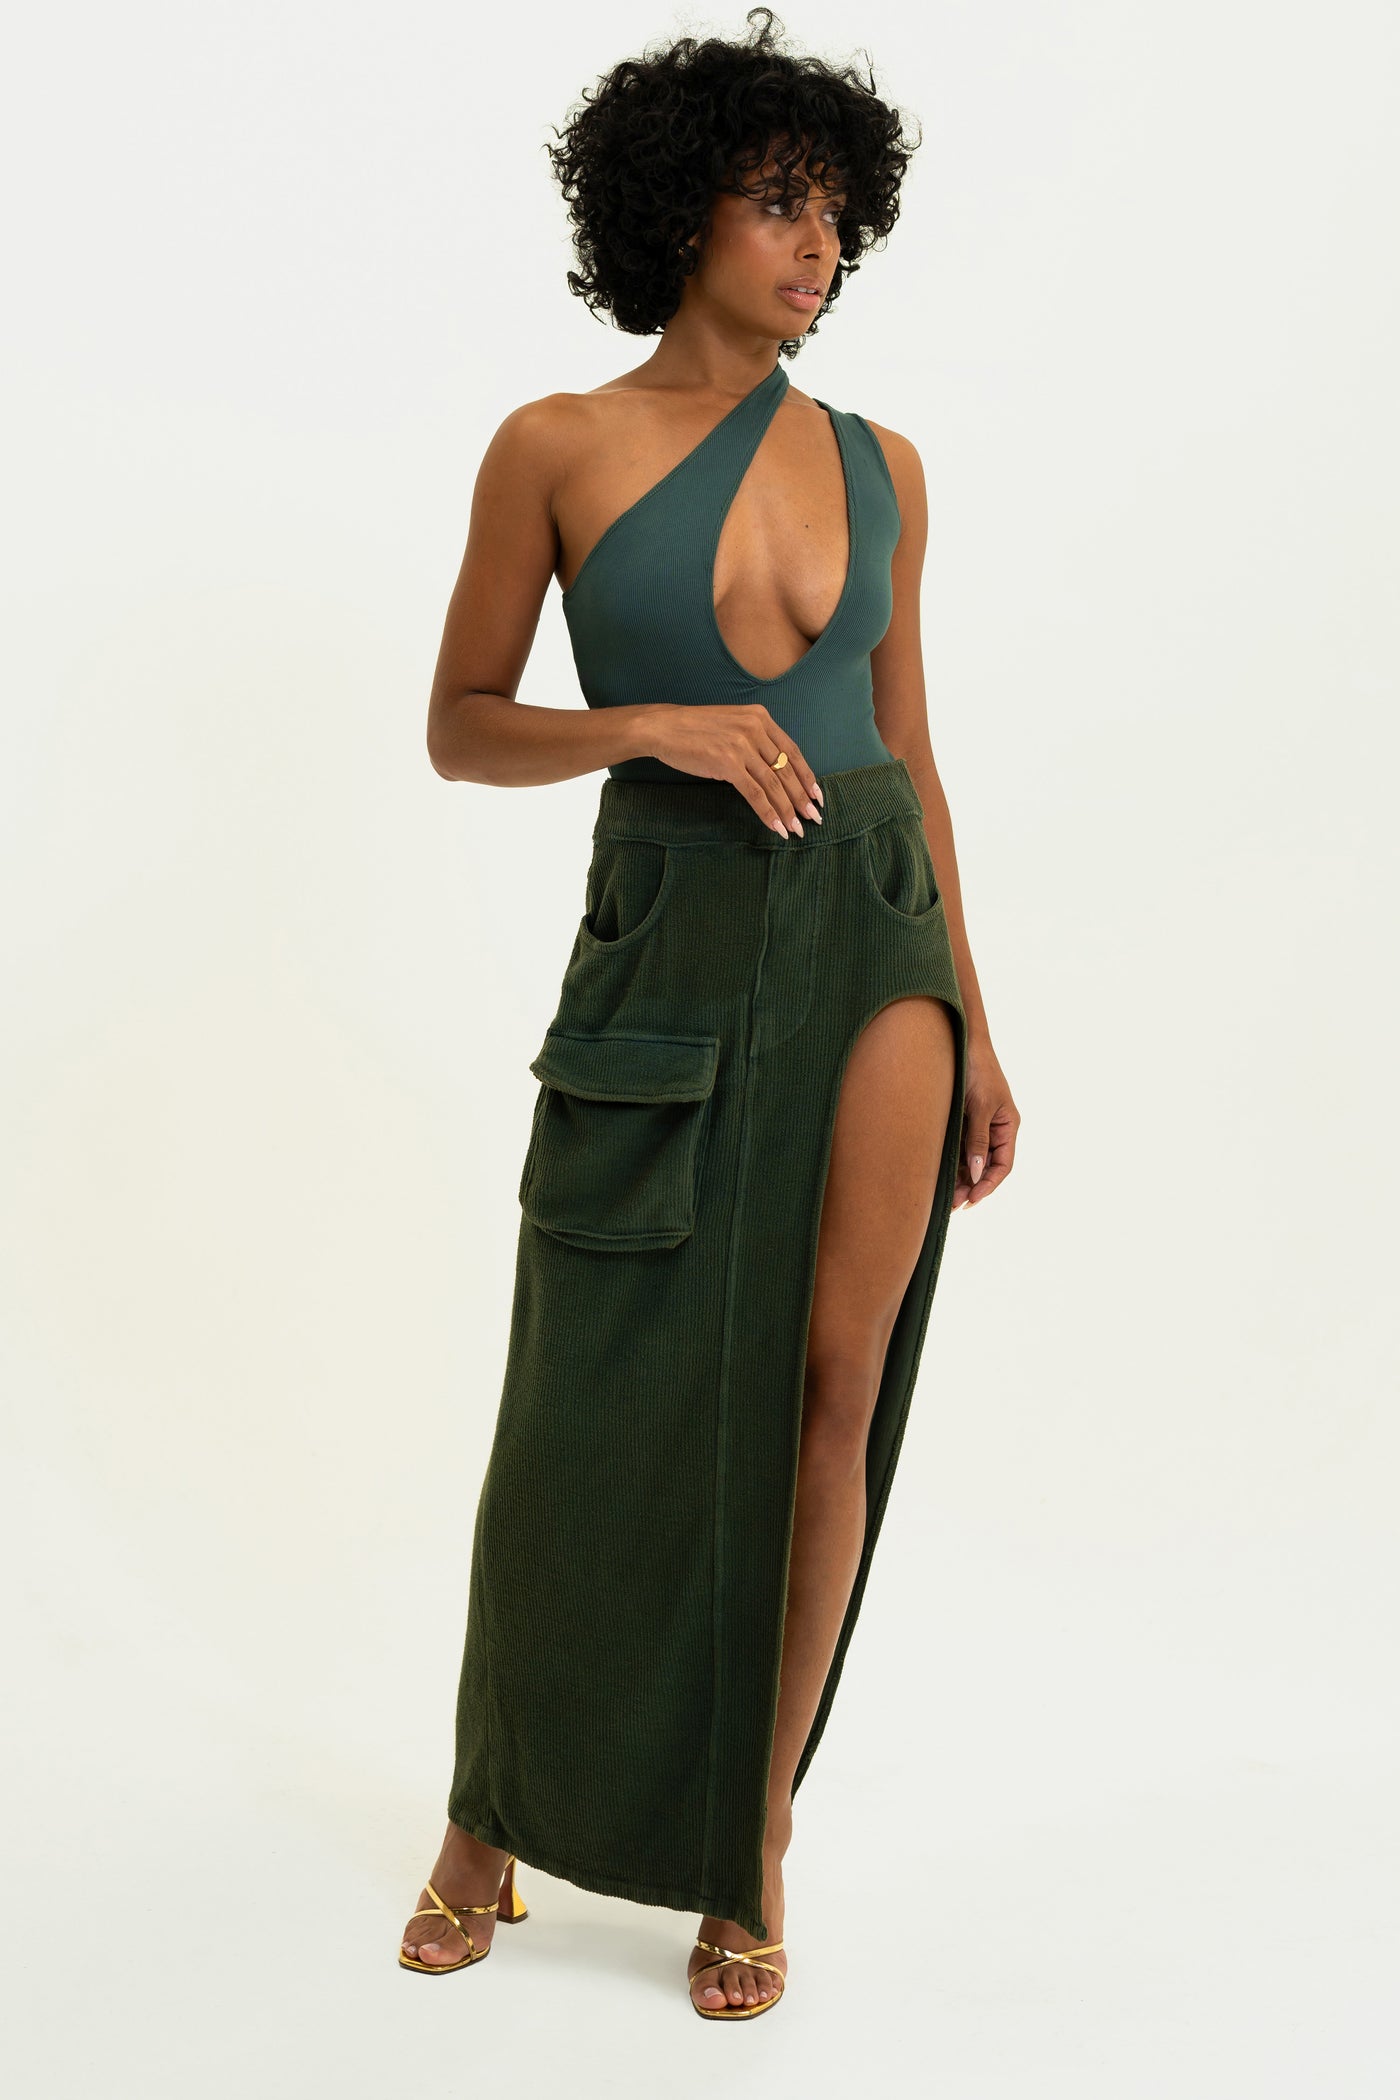 Model showcasing our Olive Asymmetrical Bodysuit. Super soft and made in the USA.